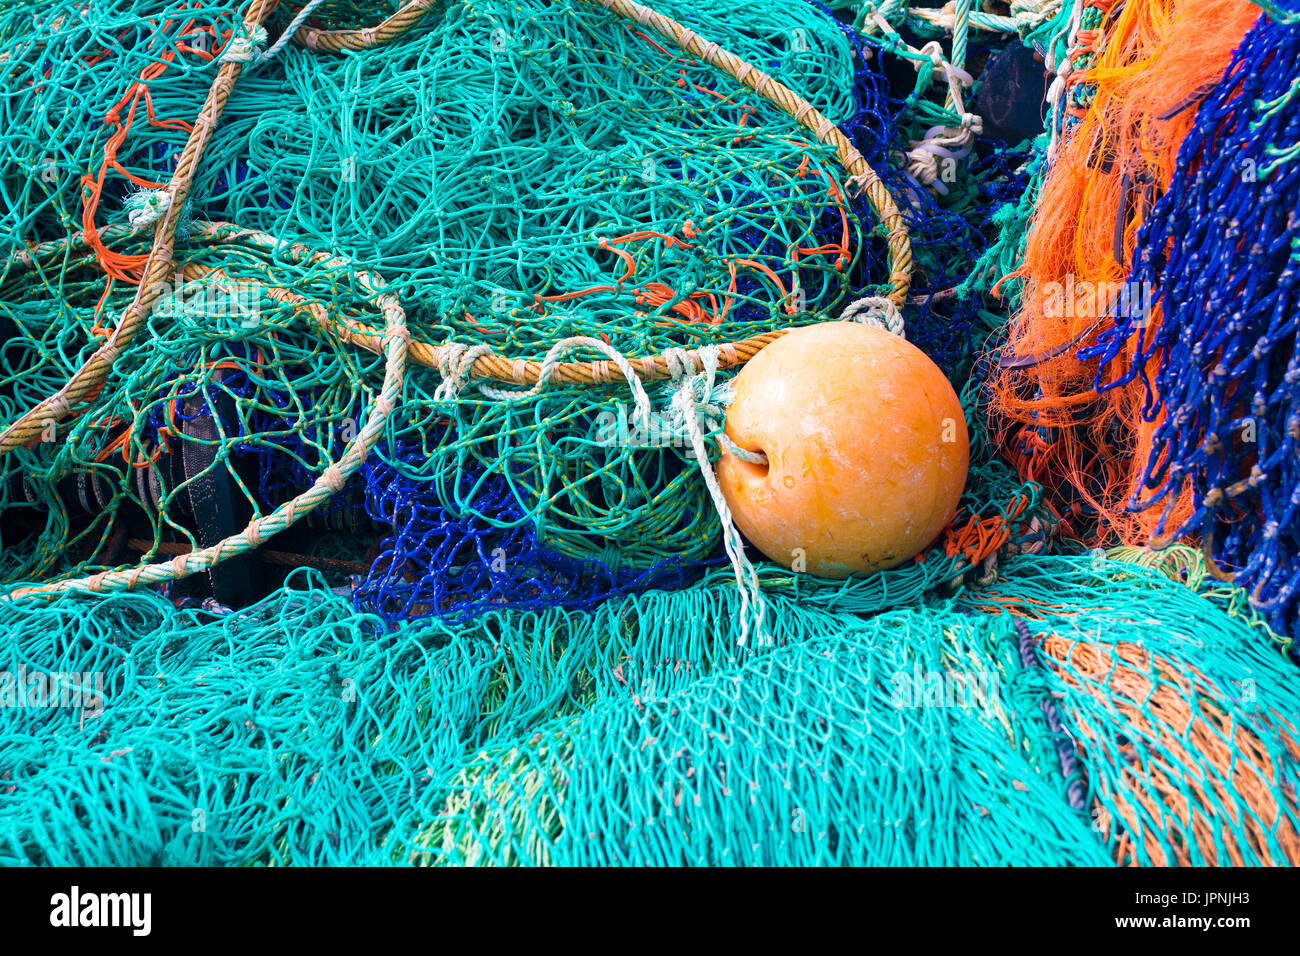 Fishing nets at the side of a fishing boat, Hove, Sussex. Stock Photo